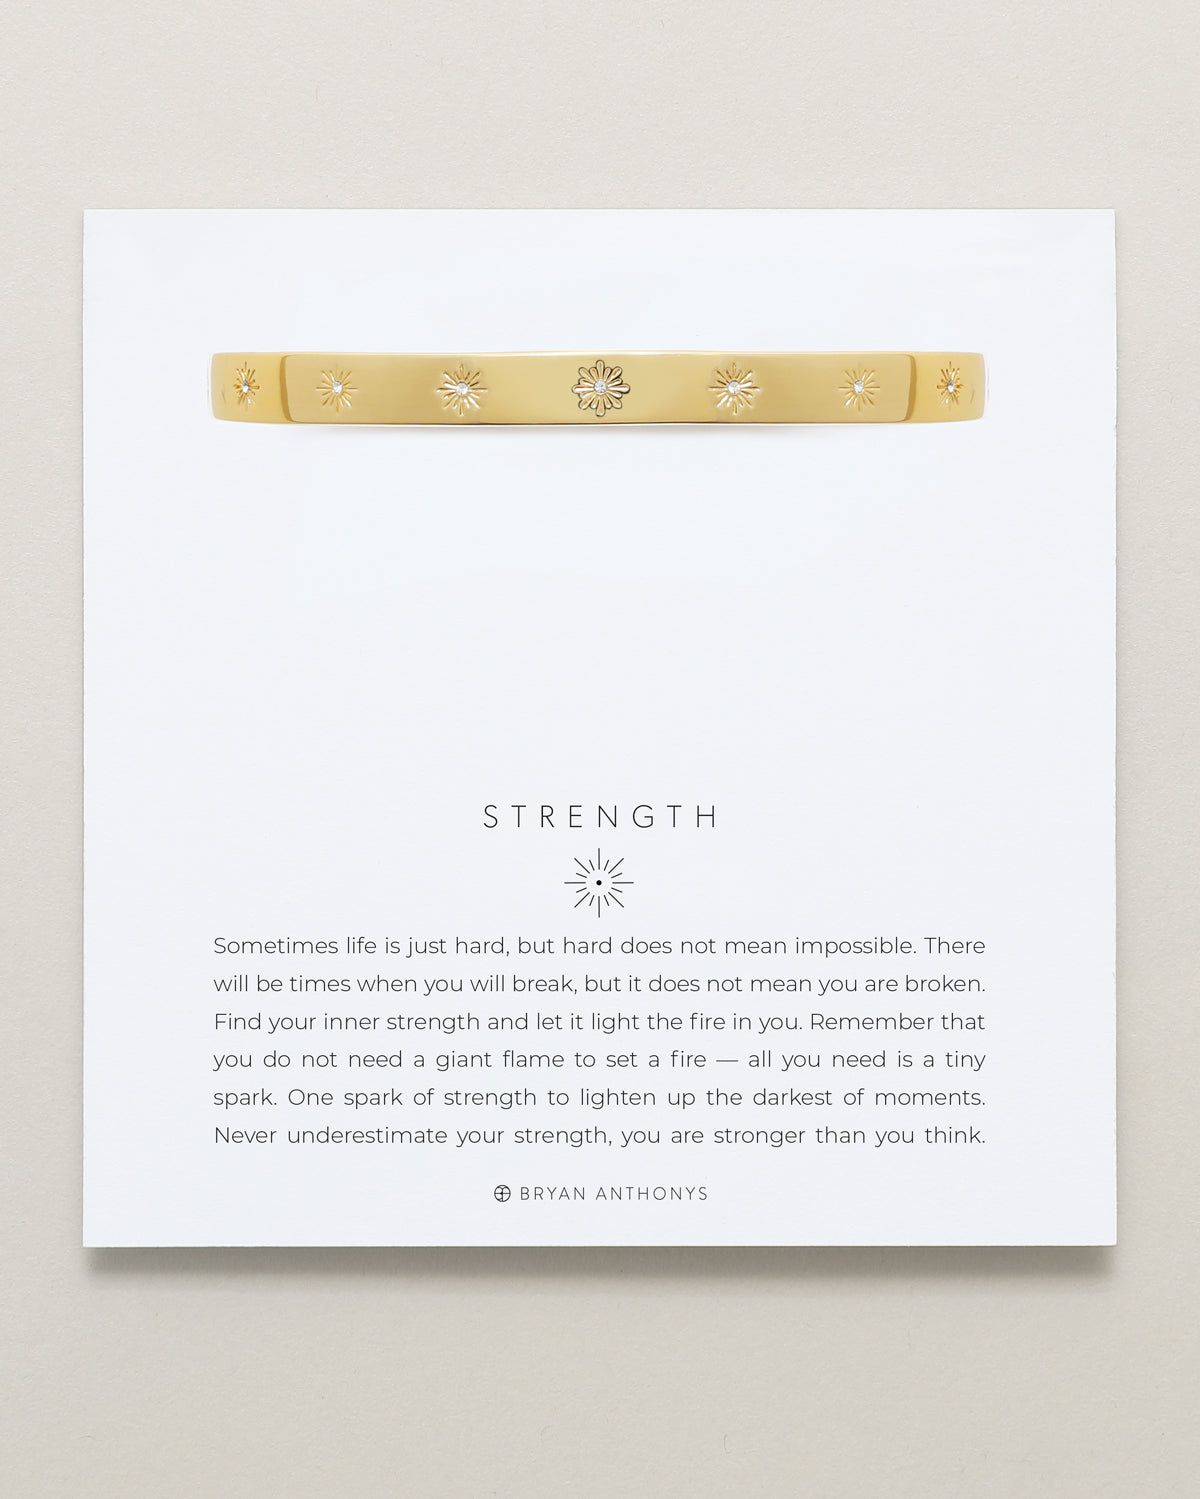 Bryan Anthonys Strength Gold Hinged Bracelet with Crystals on card